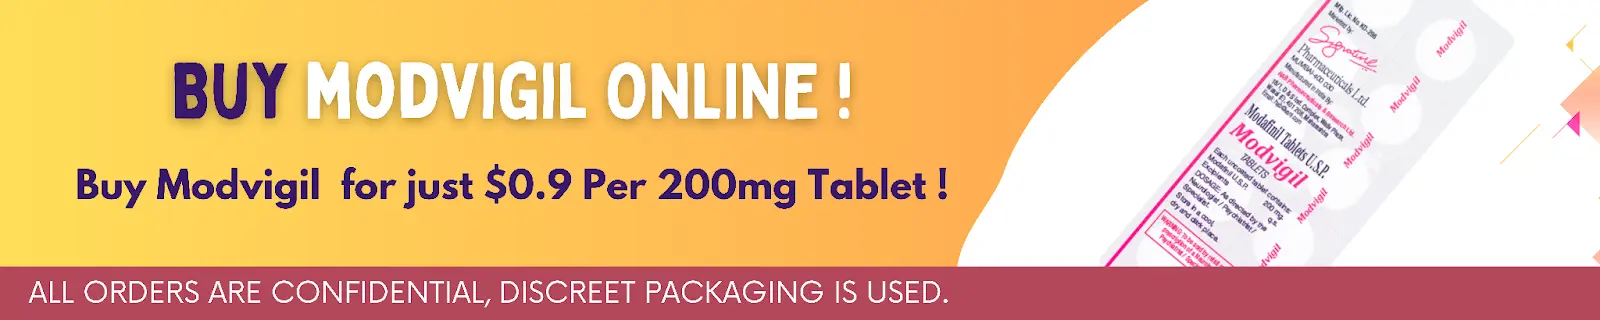 Grasp Modvigil 200 mg with fast shipping and free delivery